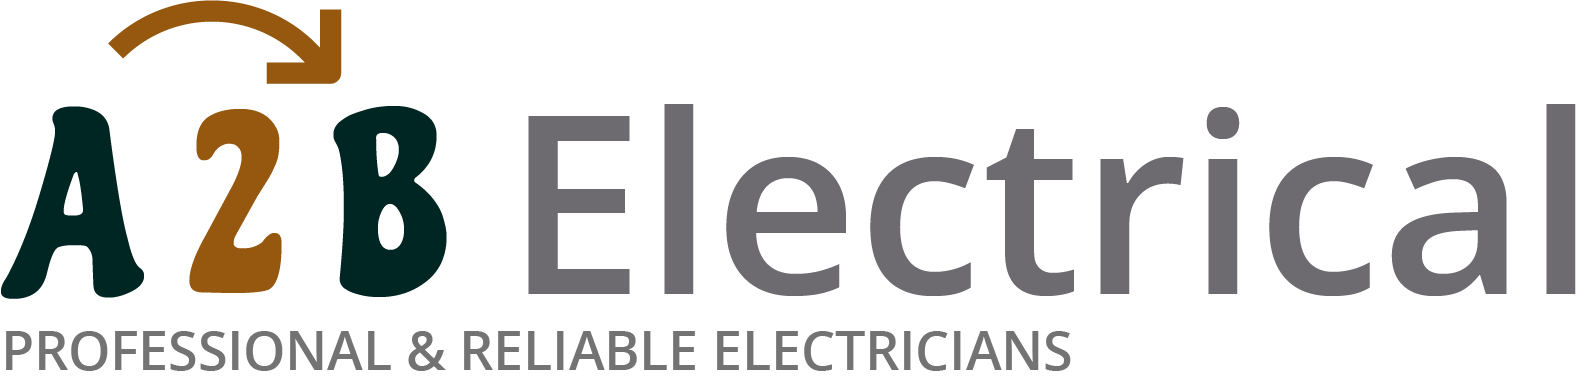 If you have electrical wiring problems in Bedlington, we can provide an electrician to have a look for you. 